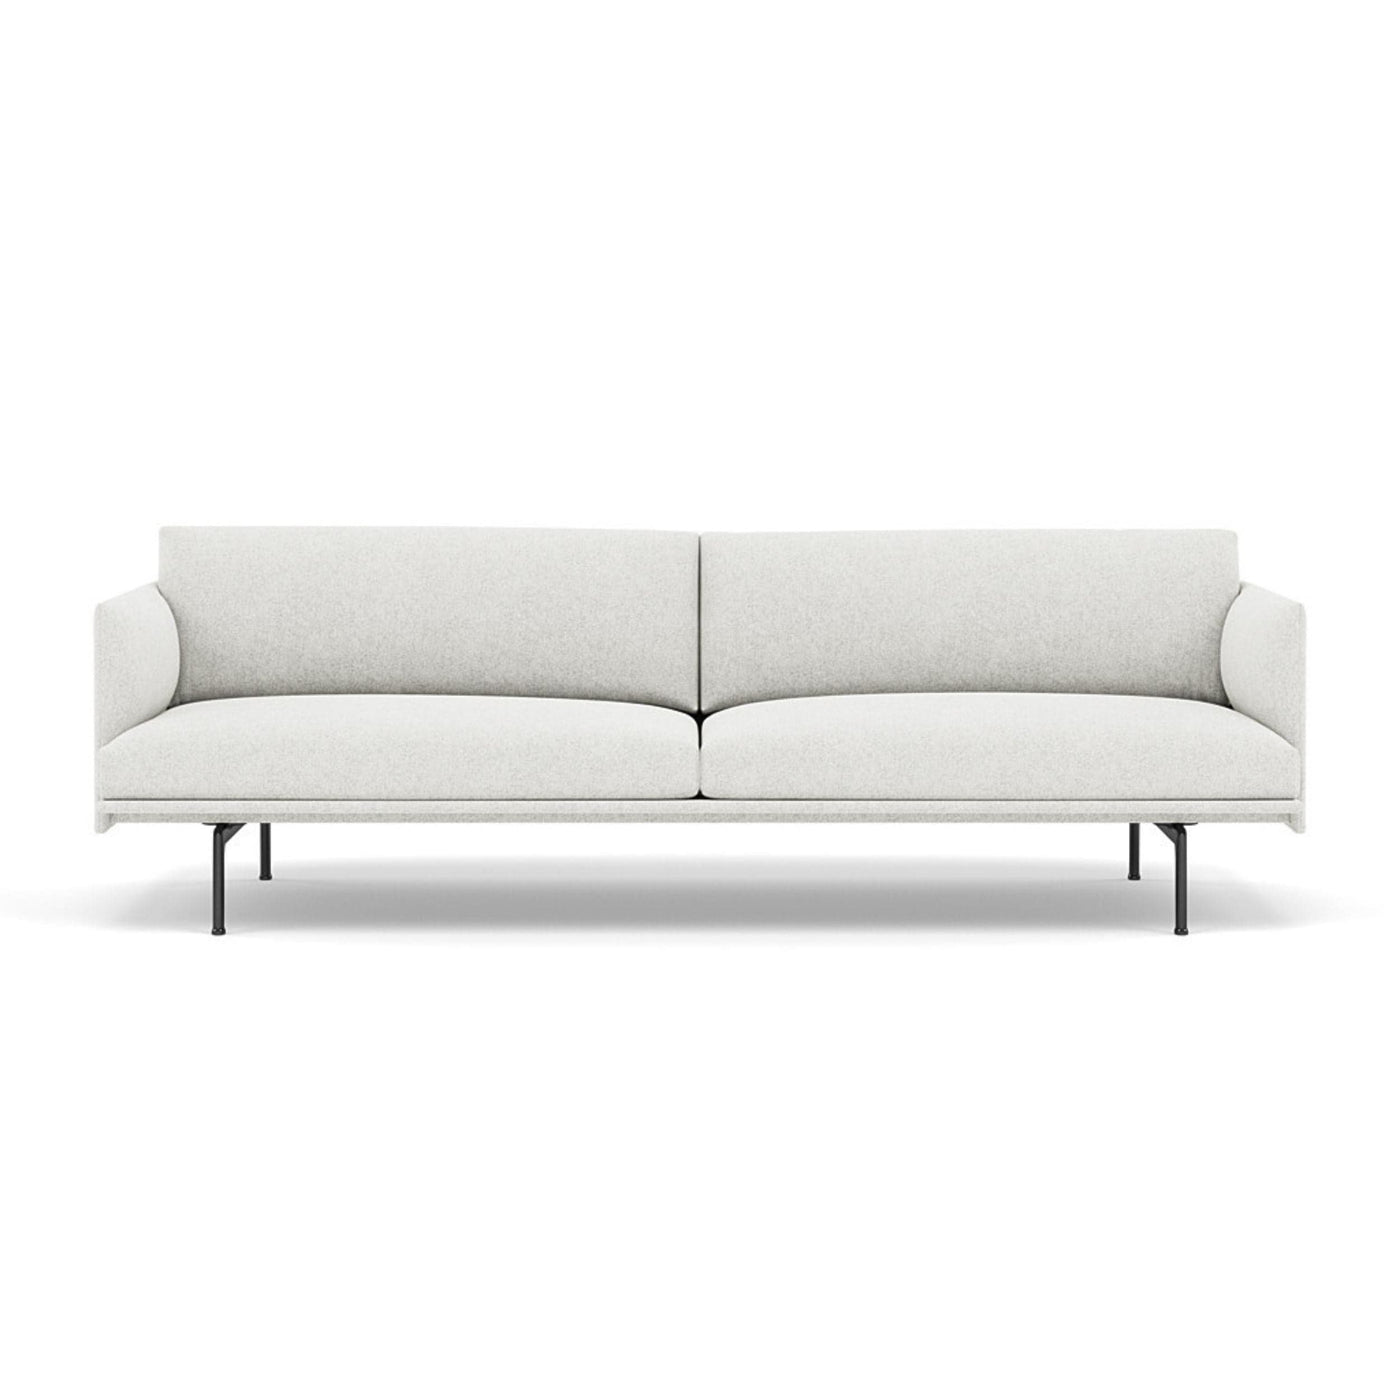 Muuto Outline  Studio Sofa 220 in hallingdal 110 and black legs. Made to order from someday designs. #colour_hallingdal-110-grey